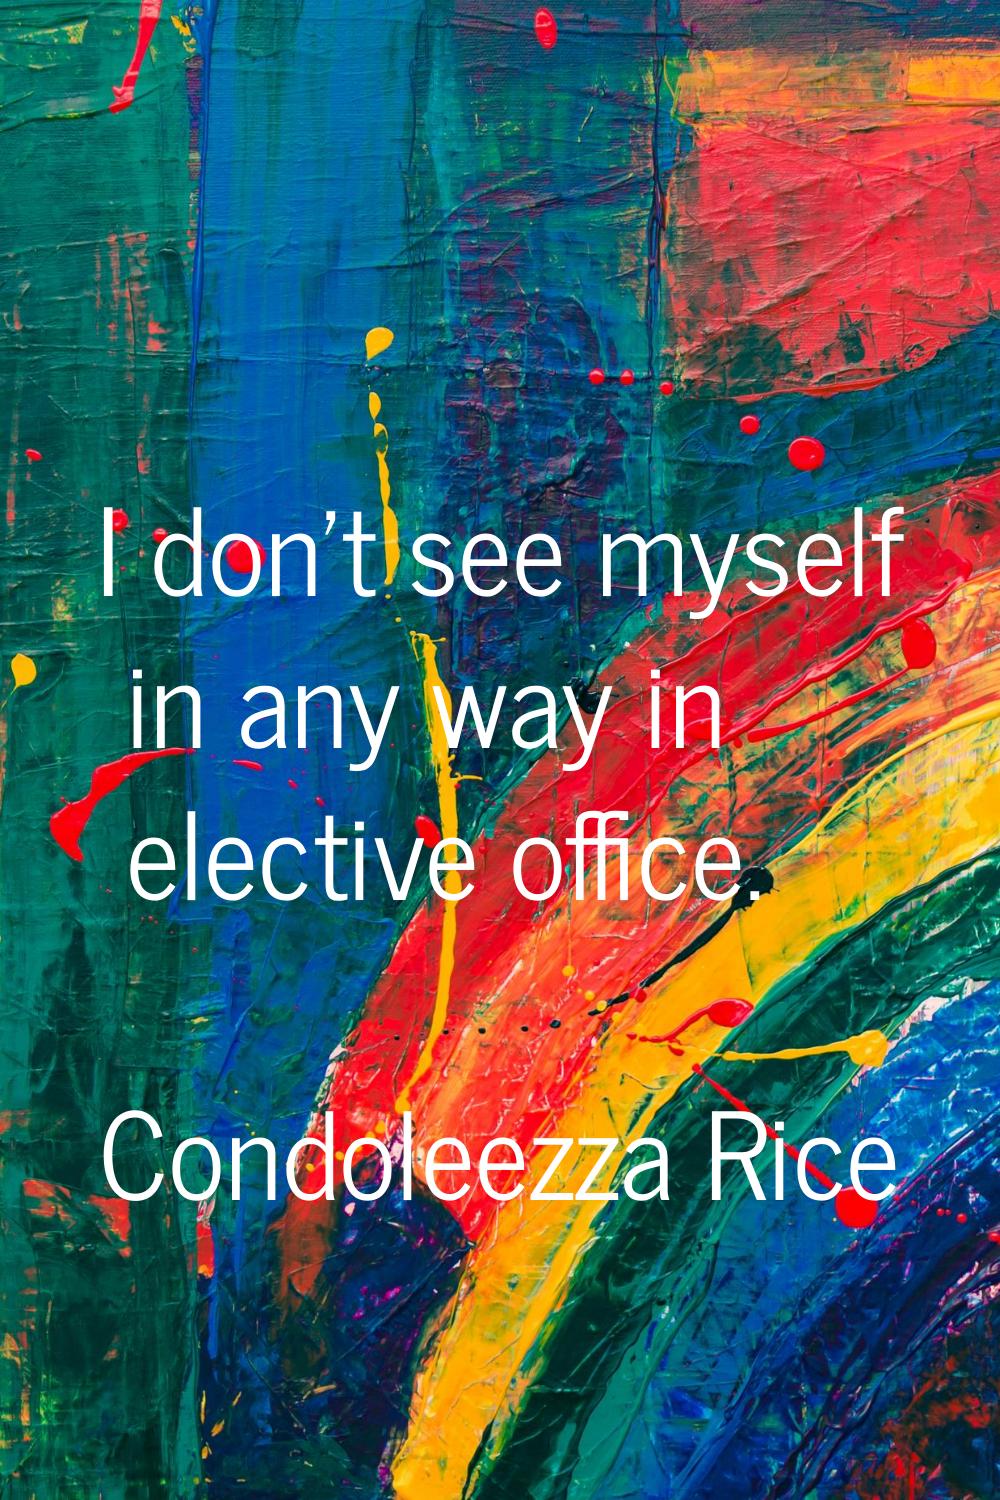 I don't see myself in any way in elective office.